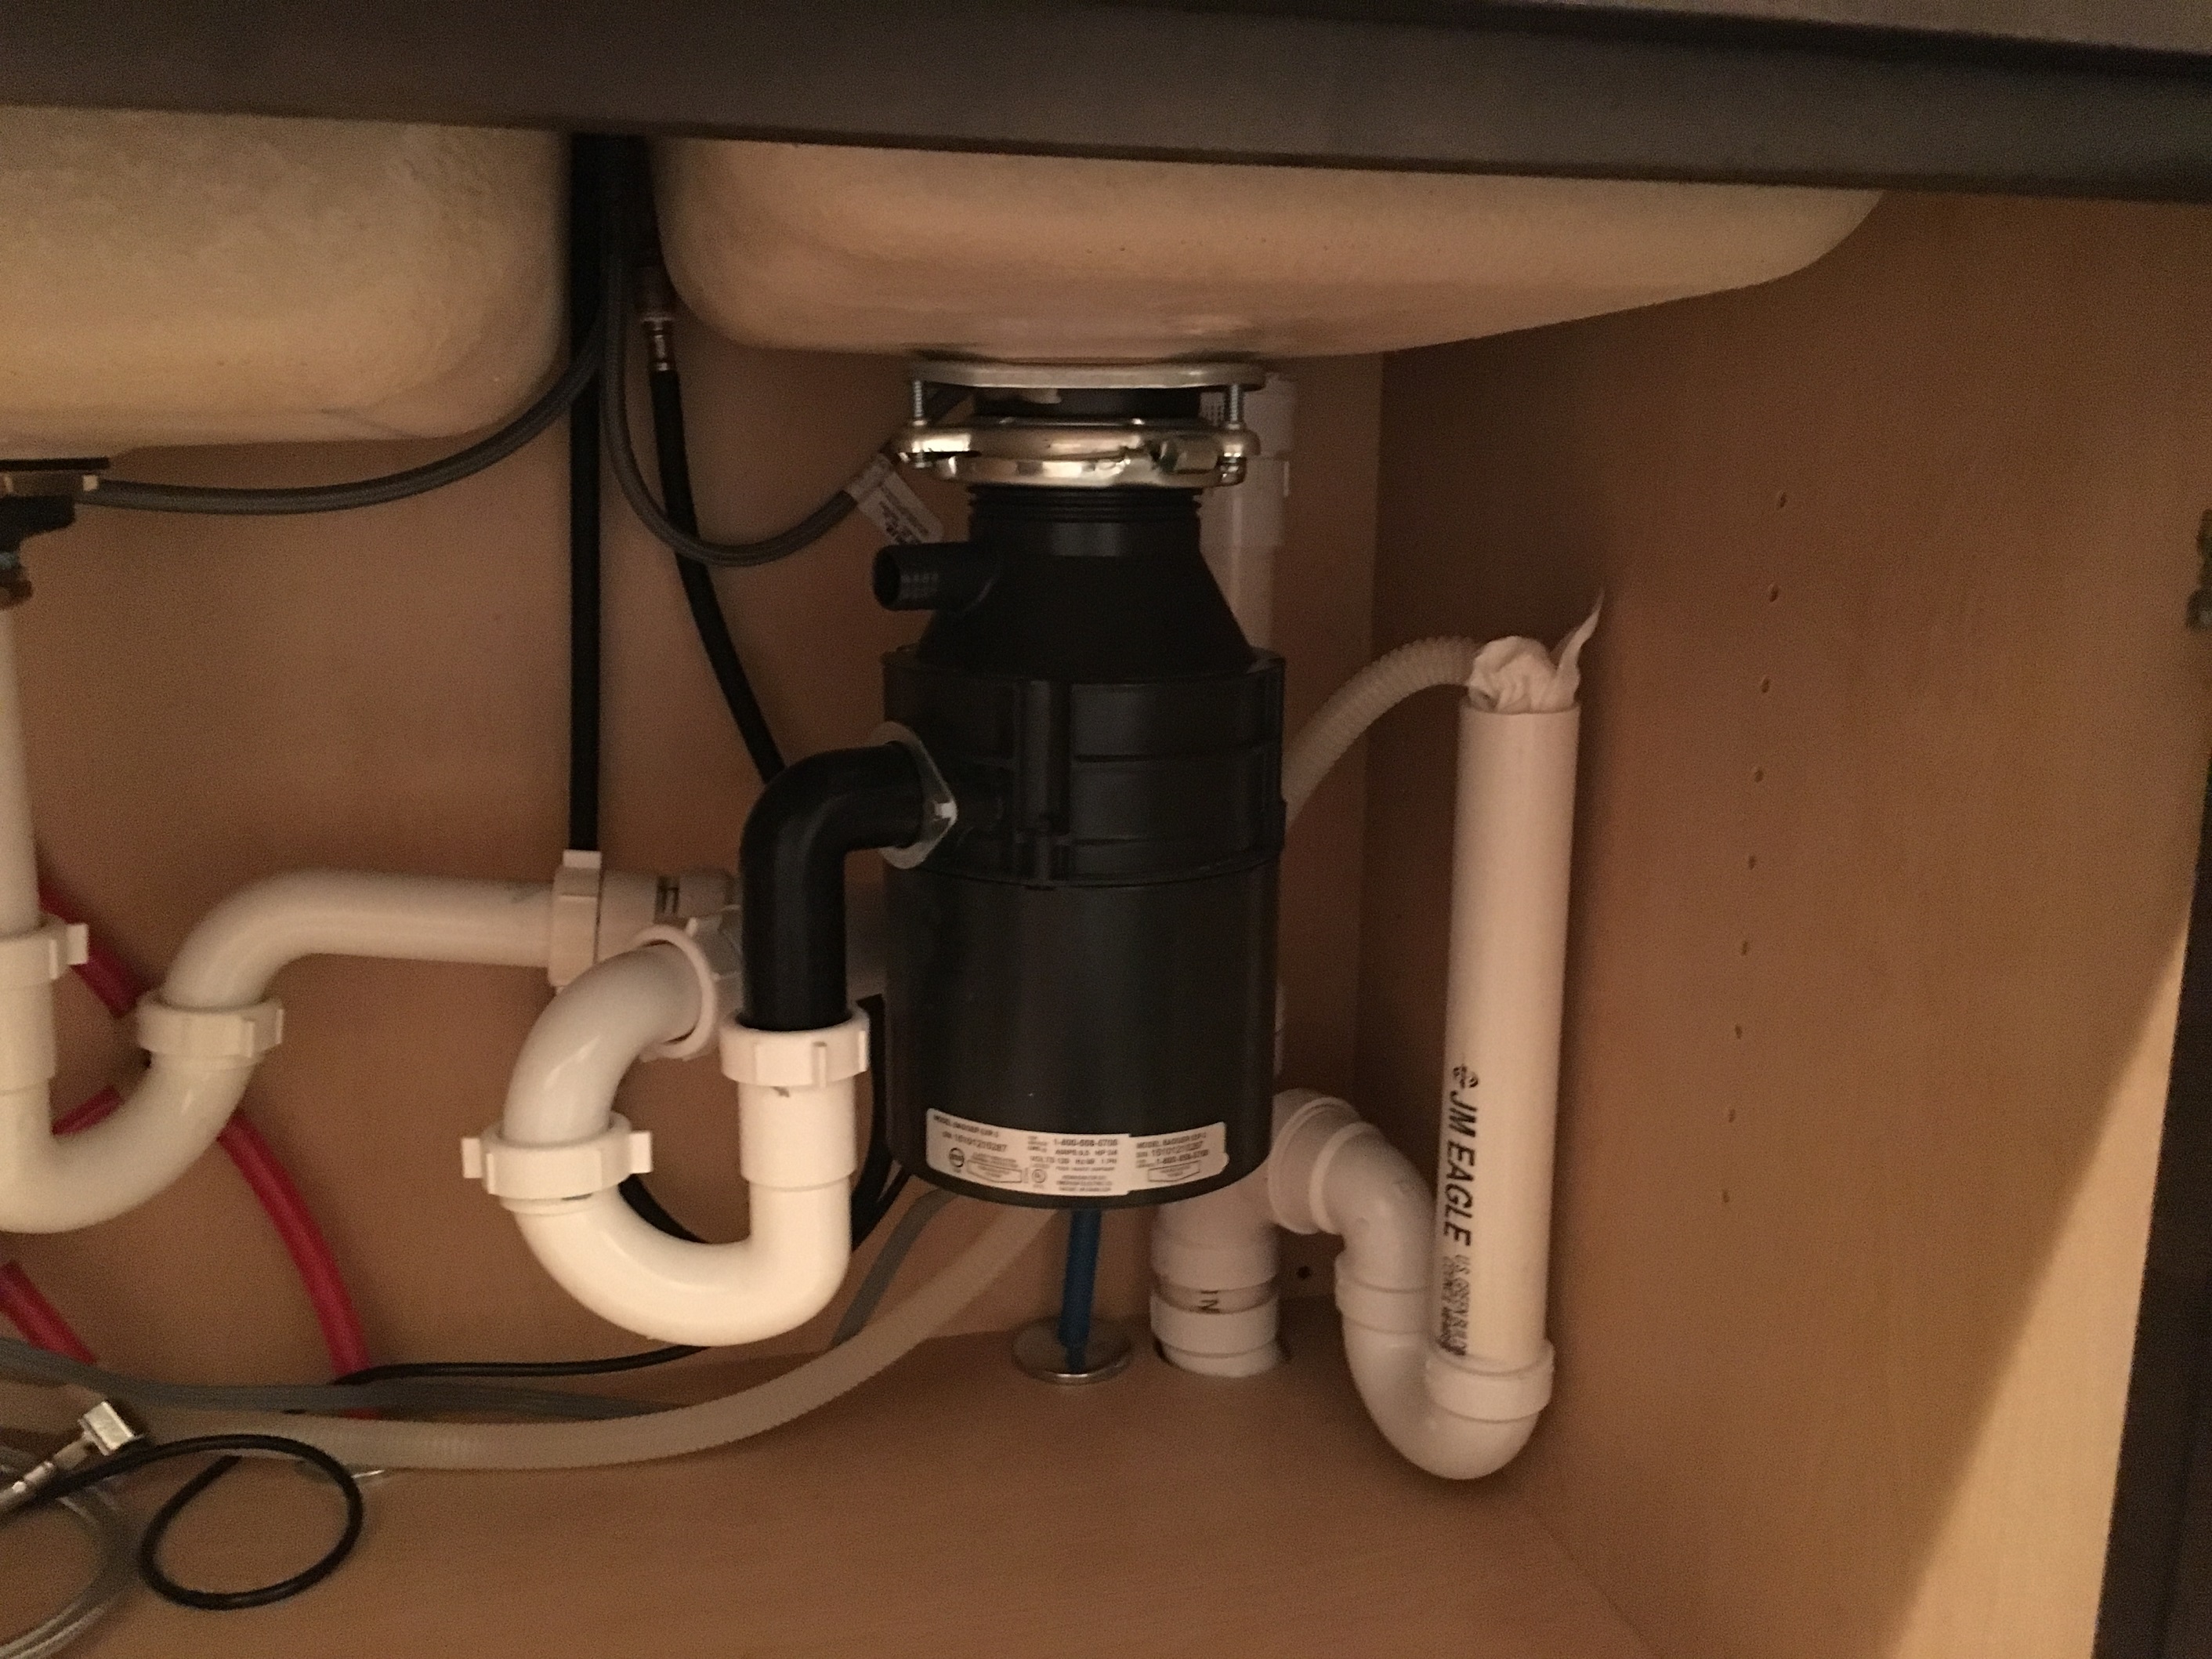 sewer smell in kitchen sink